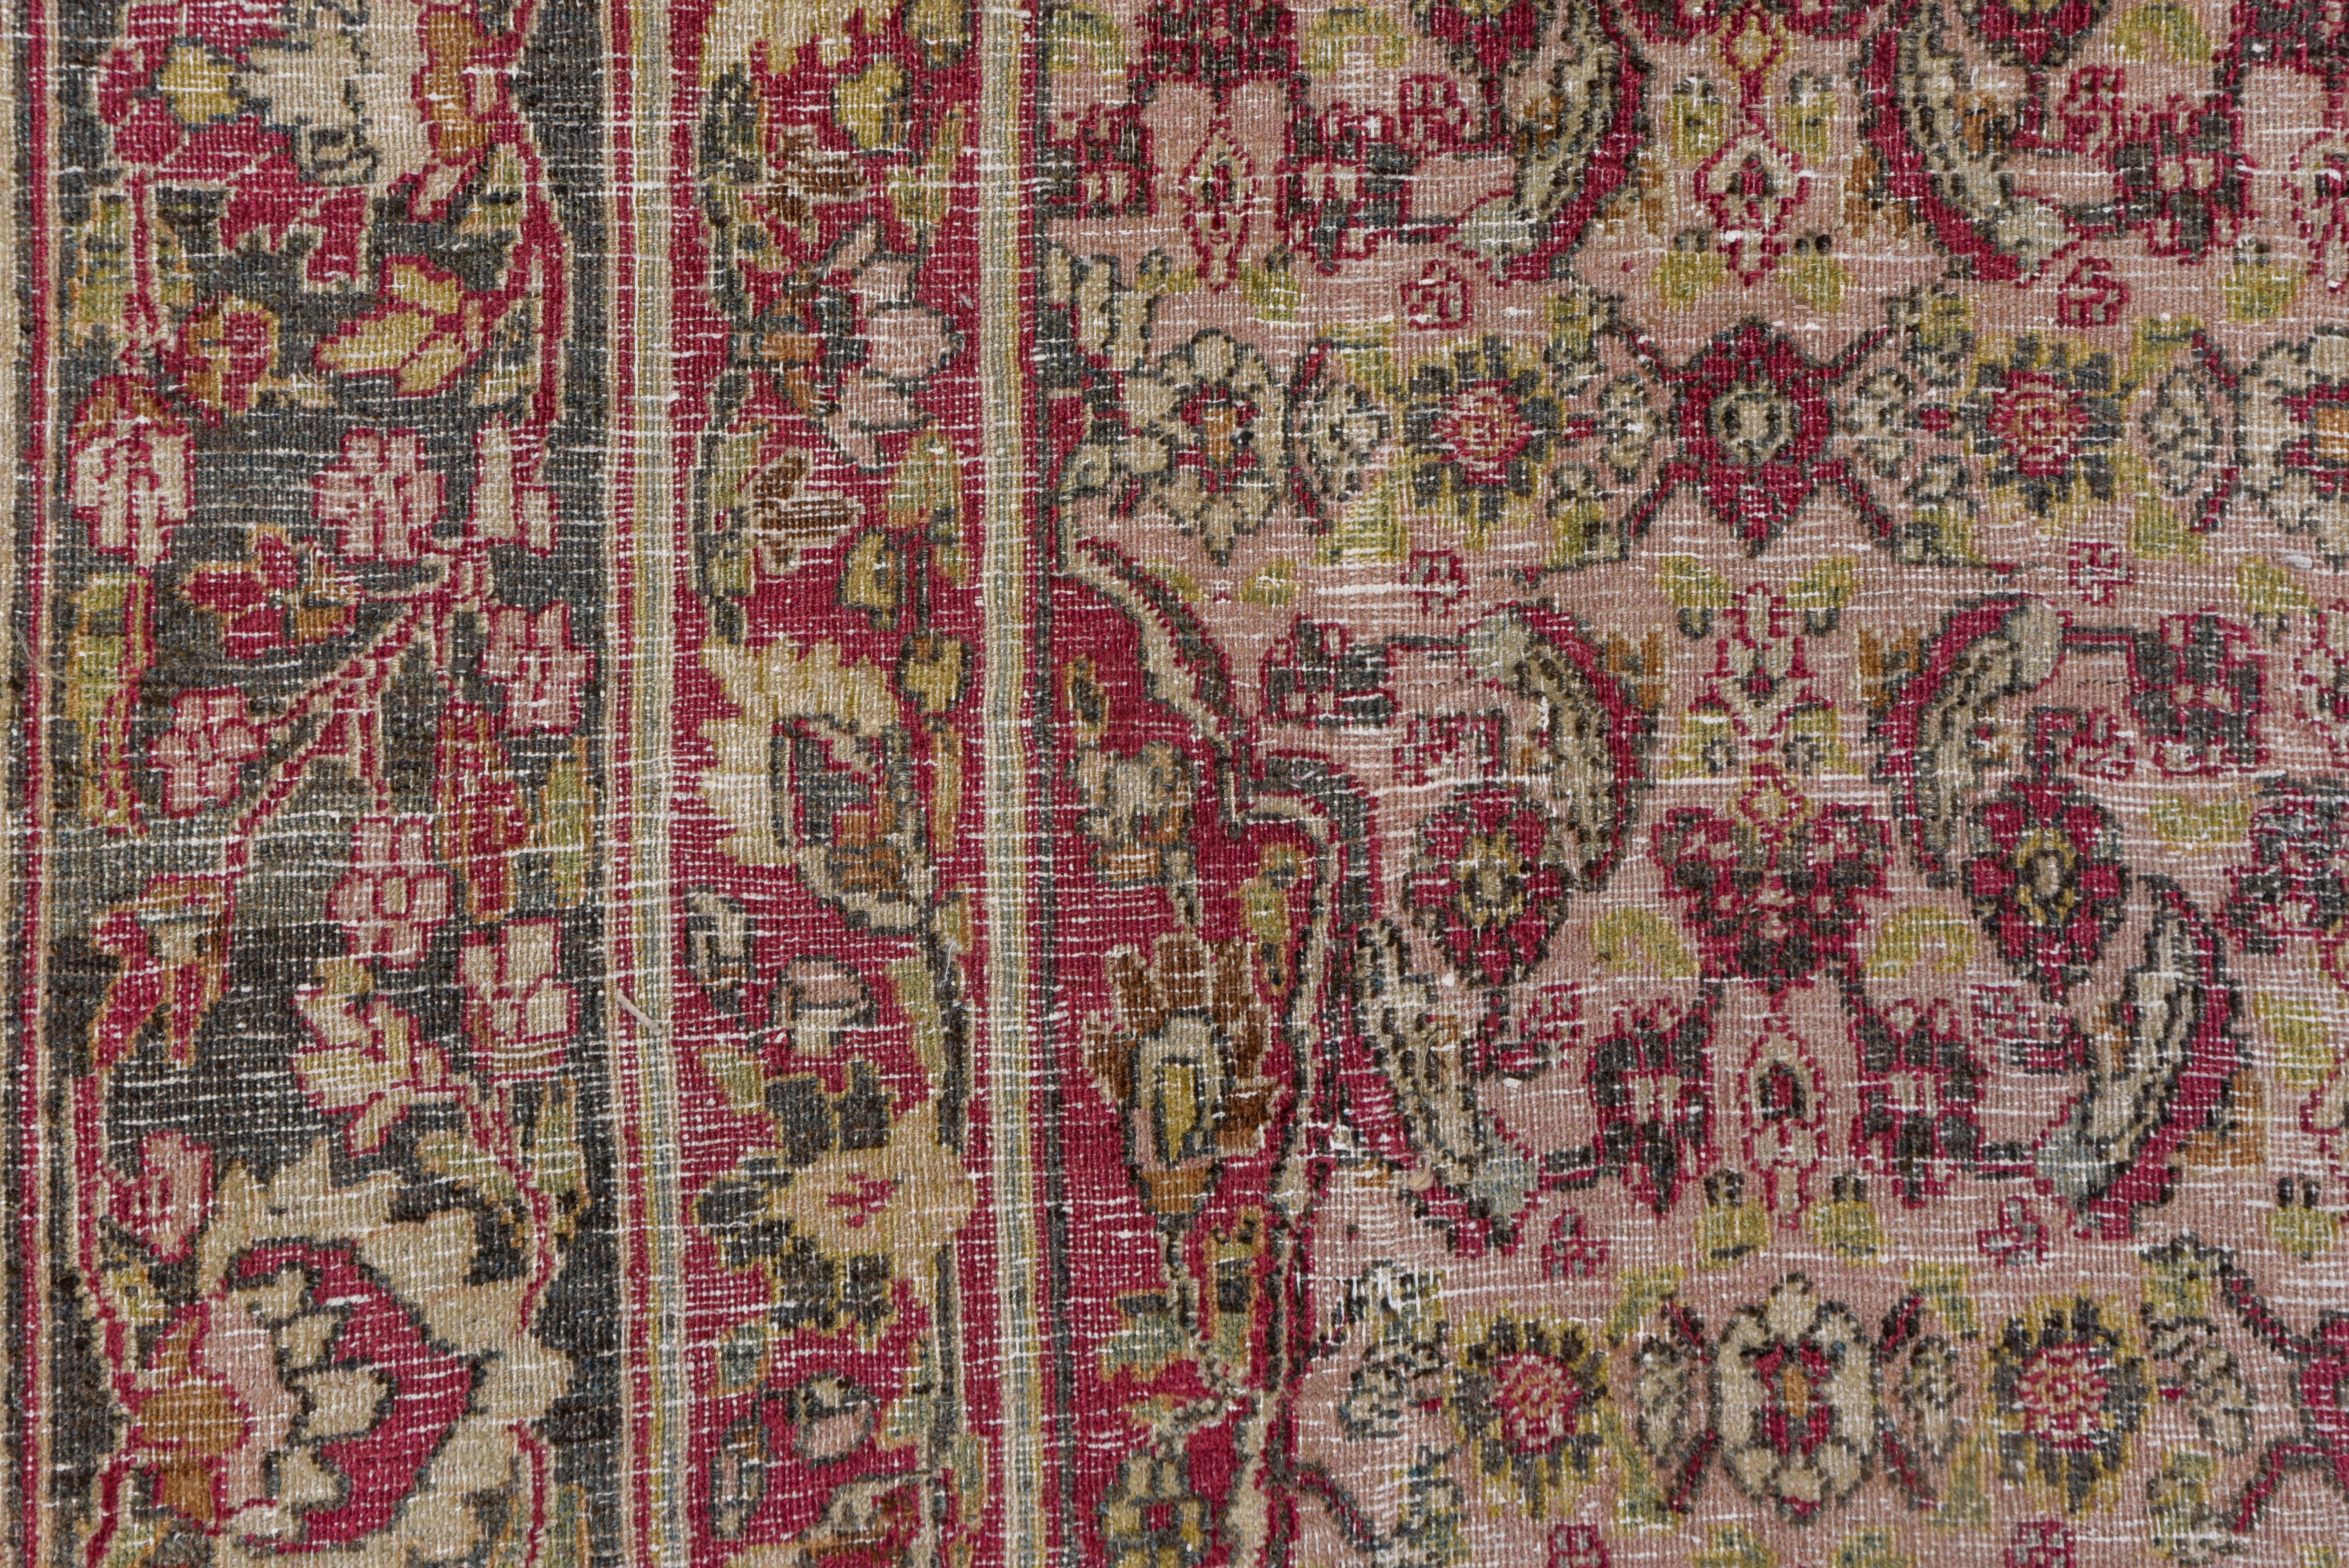 Antique Persian Khorassan Rug, Dusty Pink Field, Wine, Citron & Green Accents For Sale 1